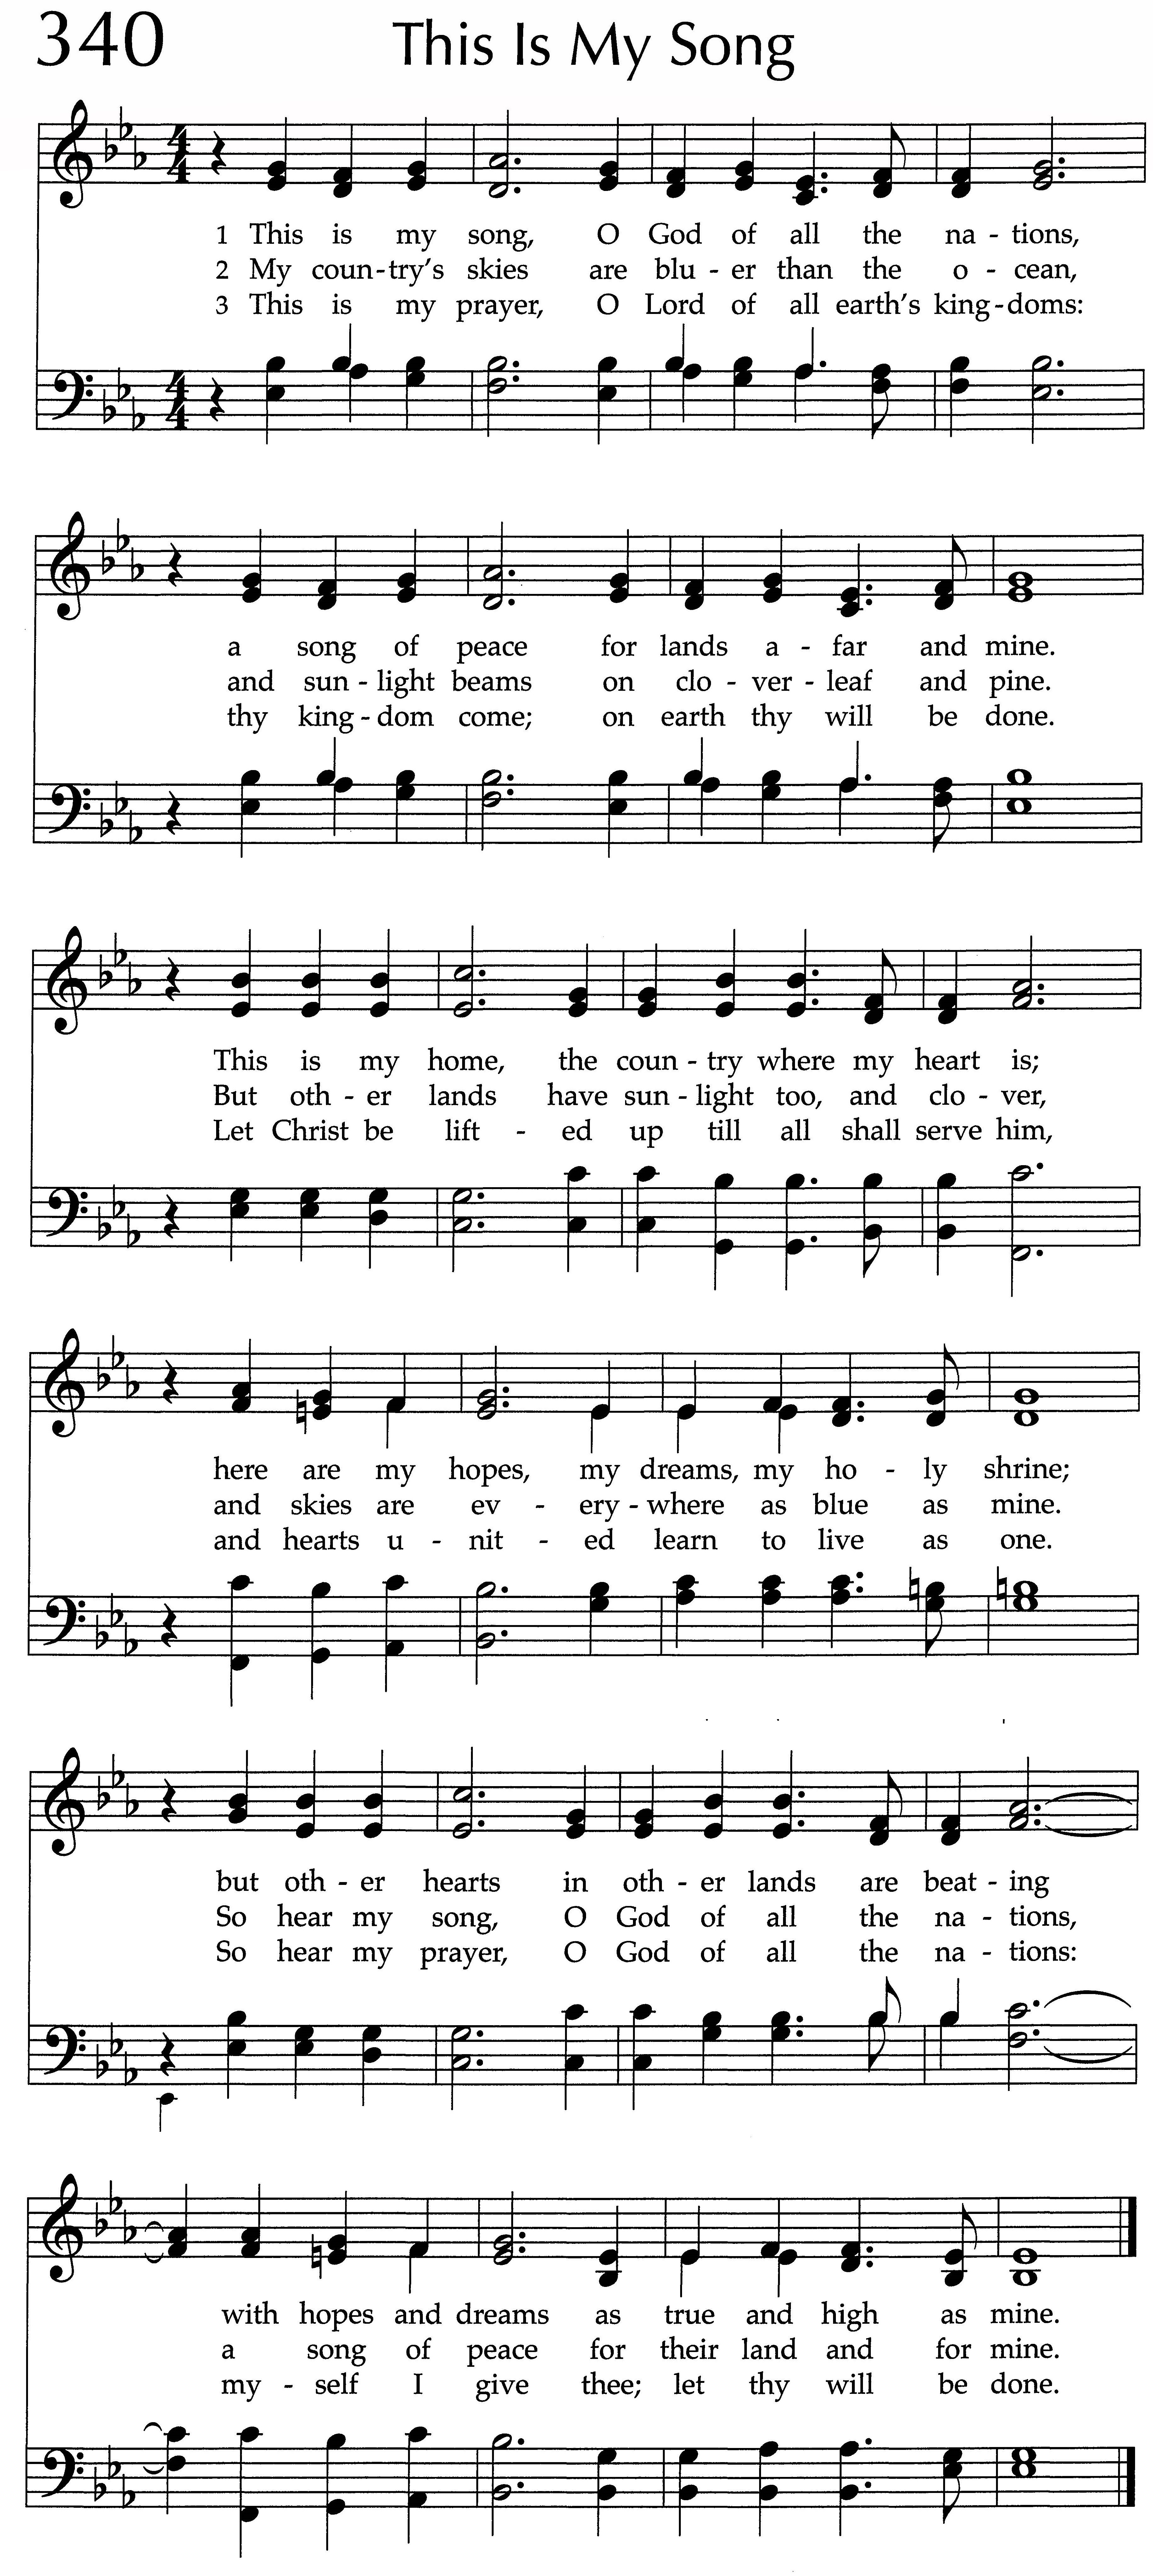 Hymnal page: 340, "This Is My Song"